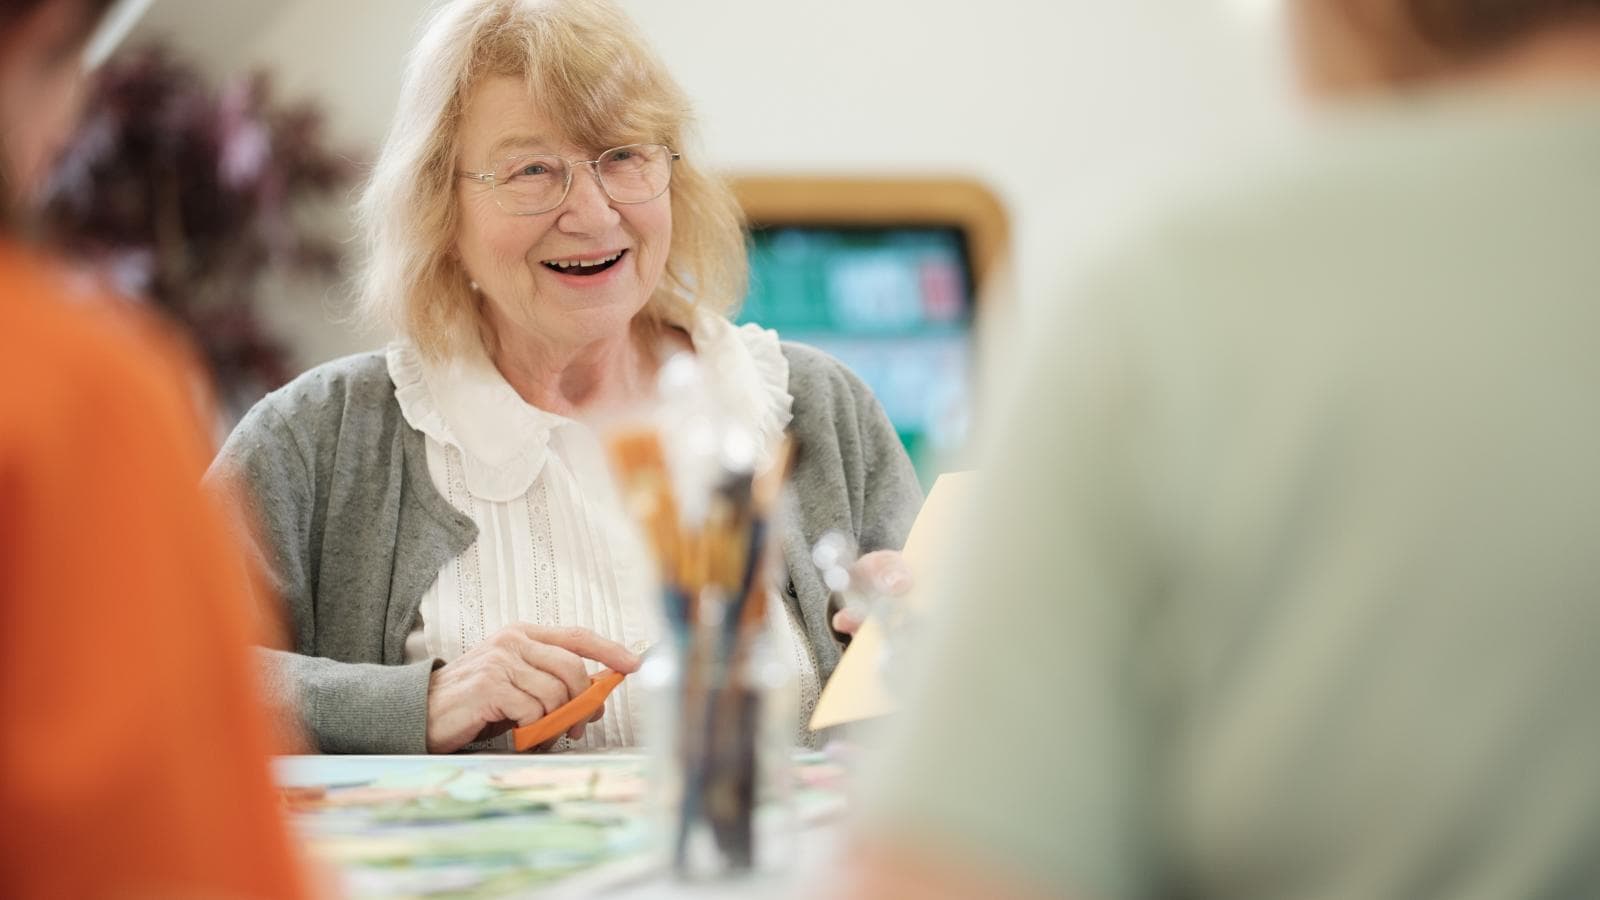 Care home arts and crafts activities